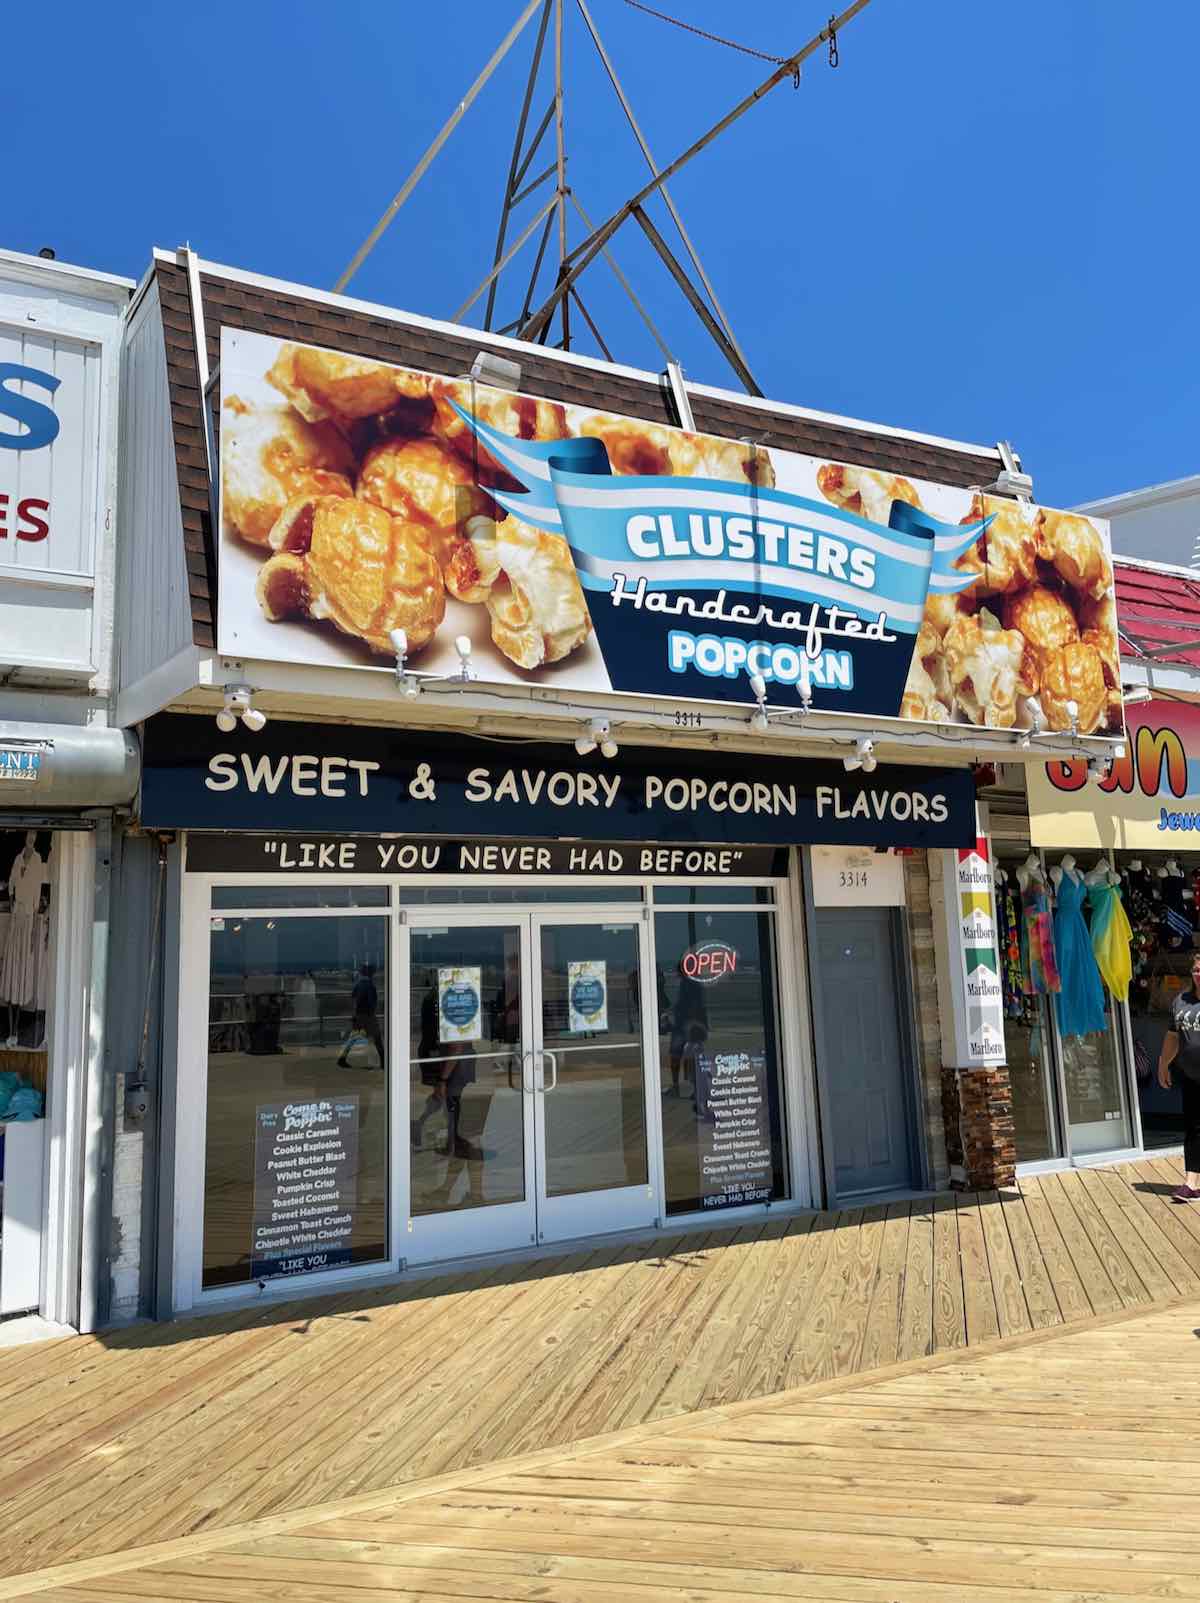 Clusters Handcrafted Popcorn Storefront on the Wildwood Boardwalk